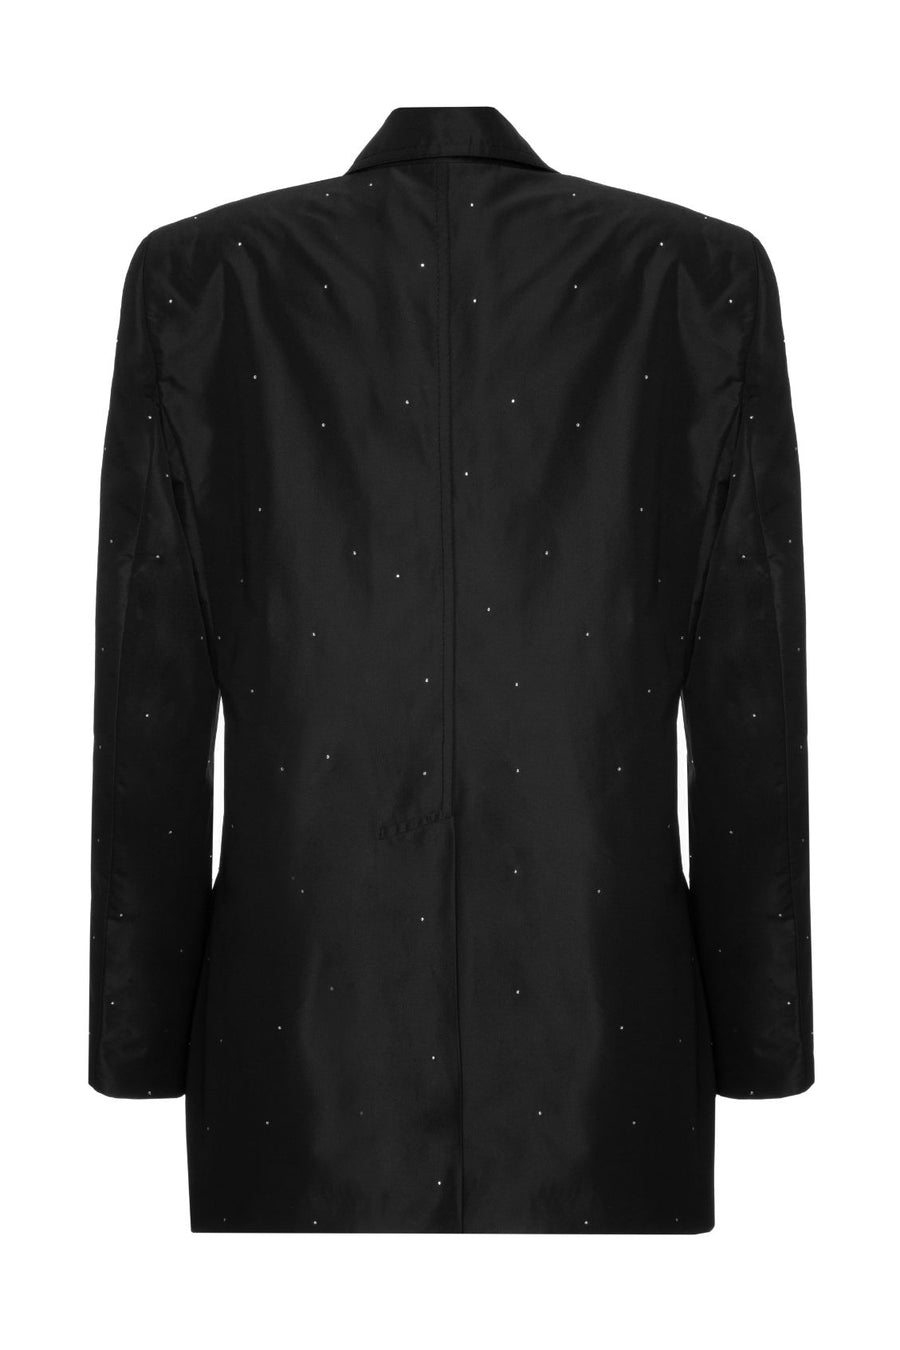 Helena Black Double-Breasted Crystal Detailing Blazer